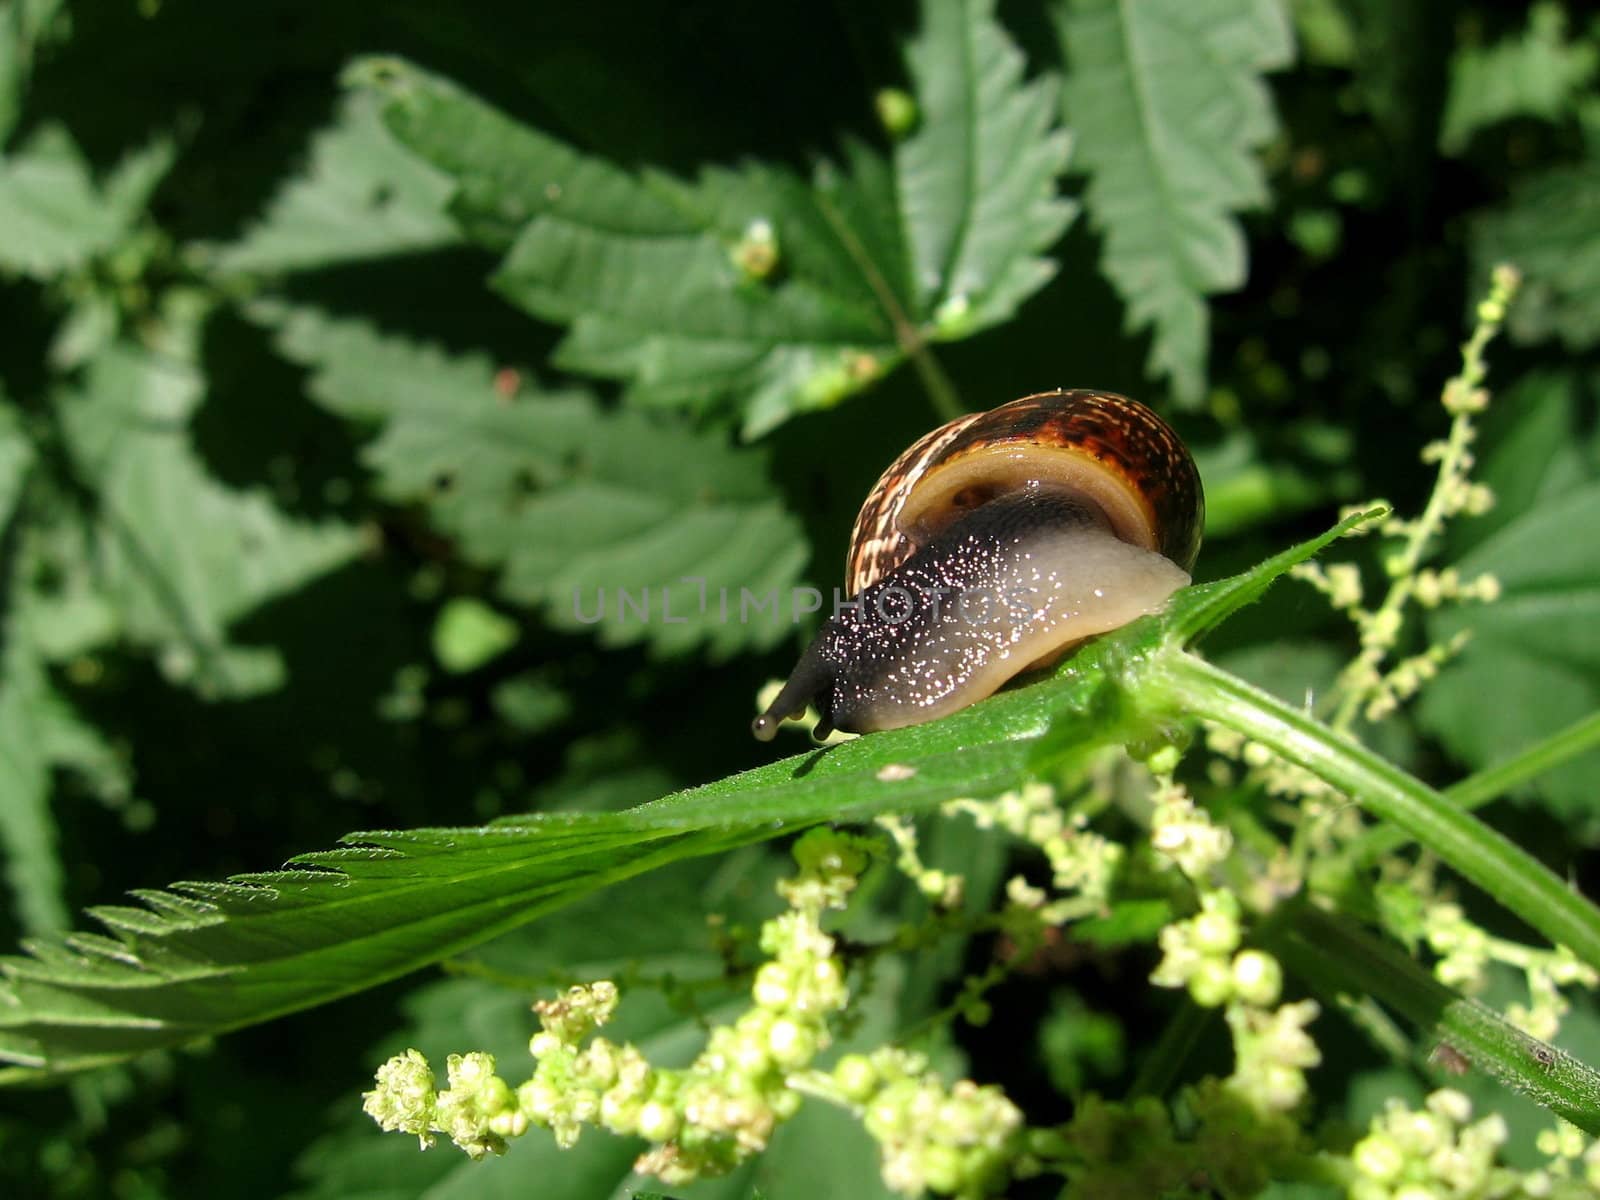 Snail by tomatto